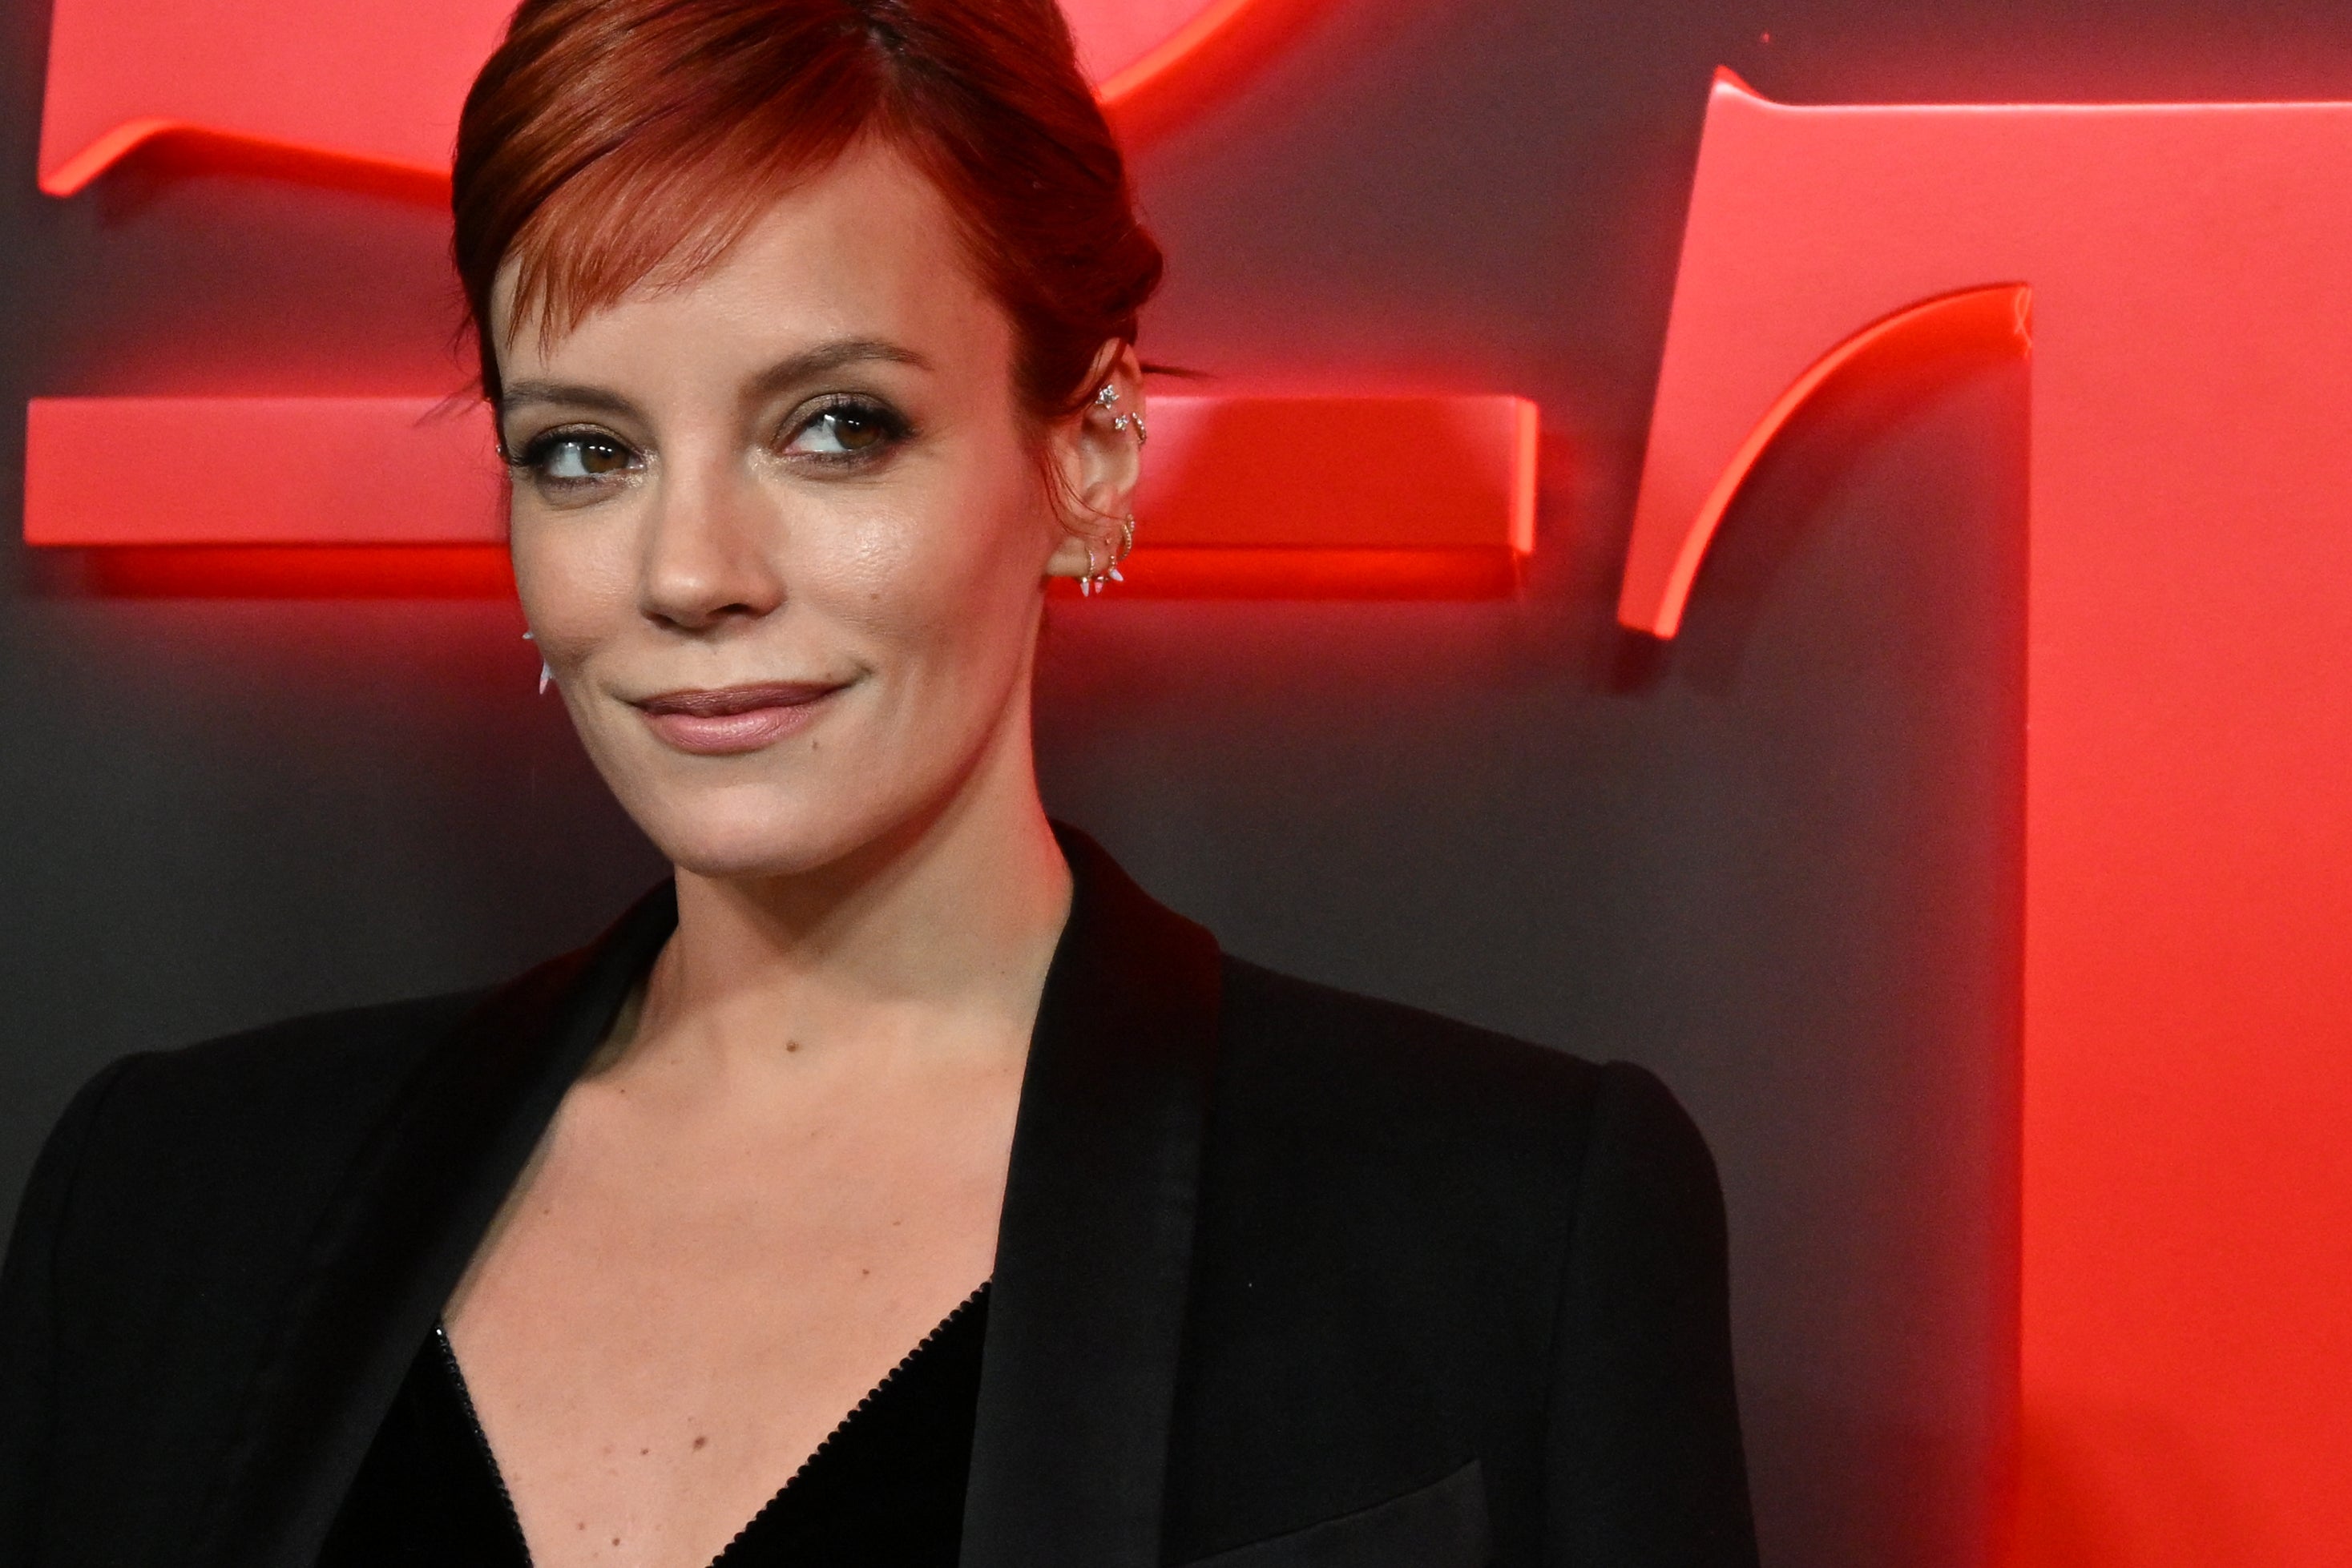 Lily Allen Has Said That She Finds It “Empowering” To Sell Foot Content On OnlyFans After Being “Sexualized From A Very Early Age”